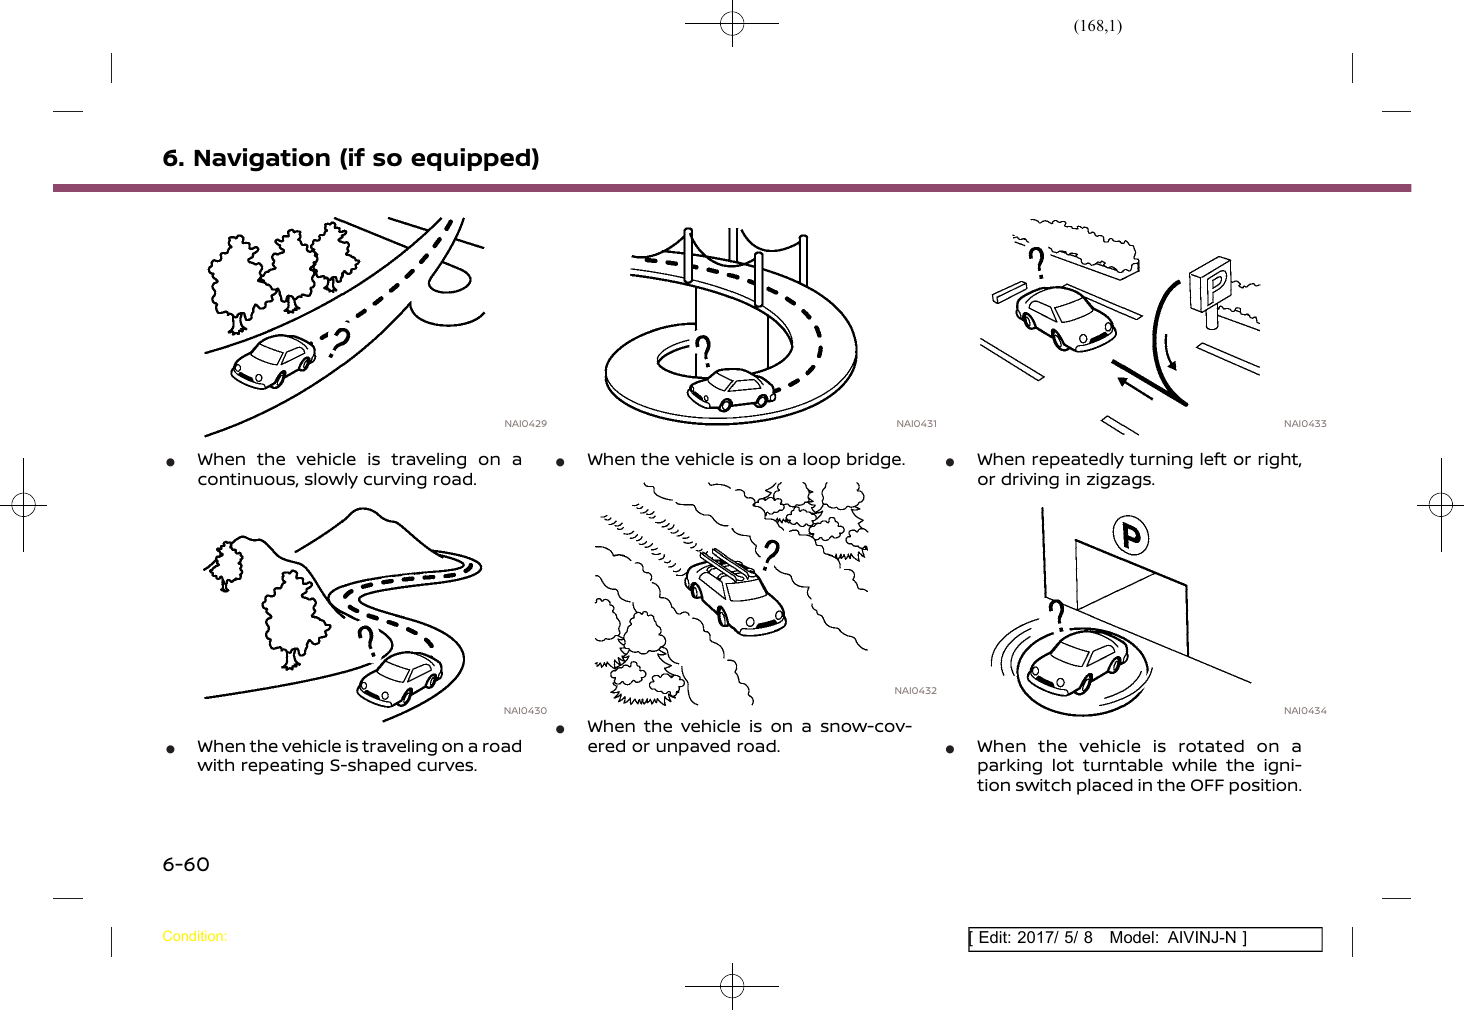 Page 168 of Robert Bosch Car Multimedia AIVICMFB0 Navigation System with Bluetooth and WLAN User Manual